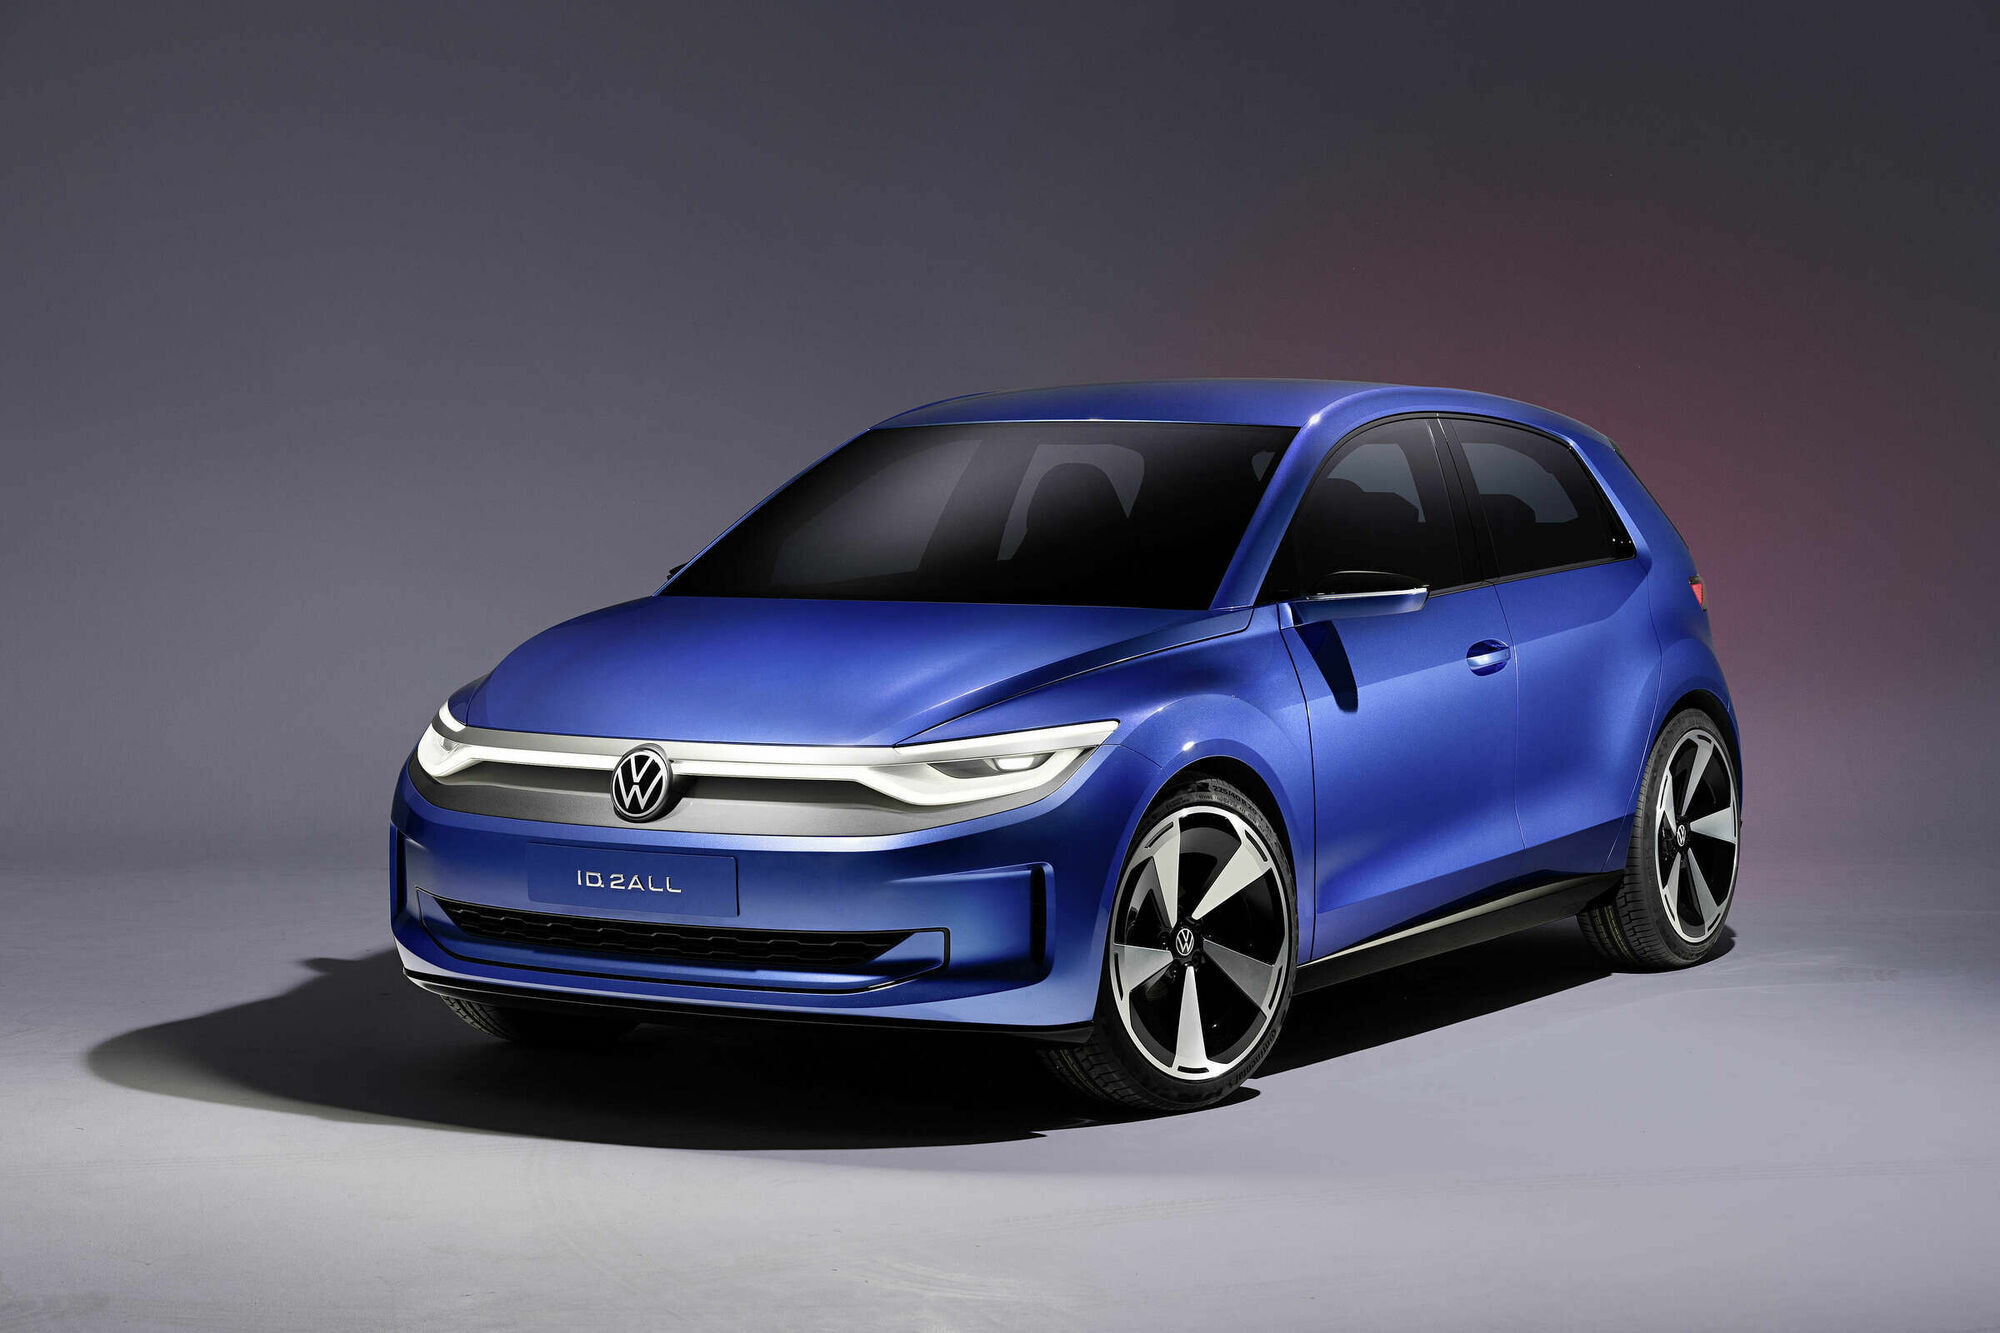 Volkswagen presented an electric vehicle that costs less than 25,000 euros